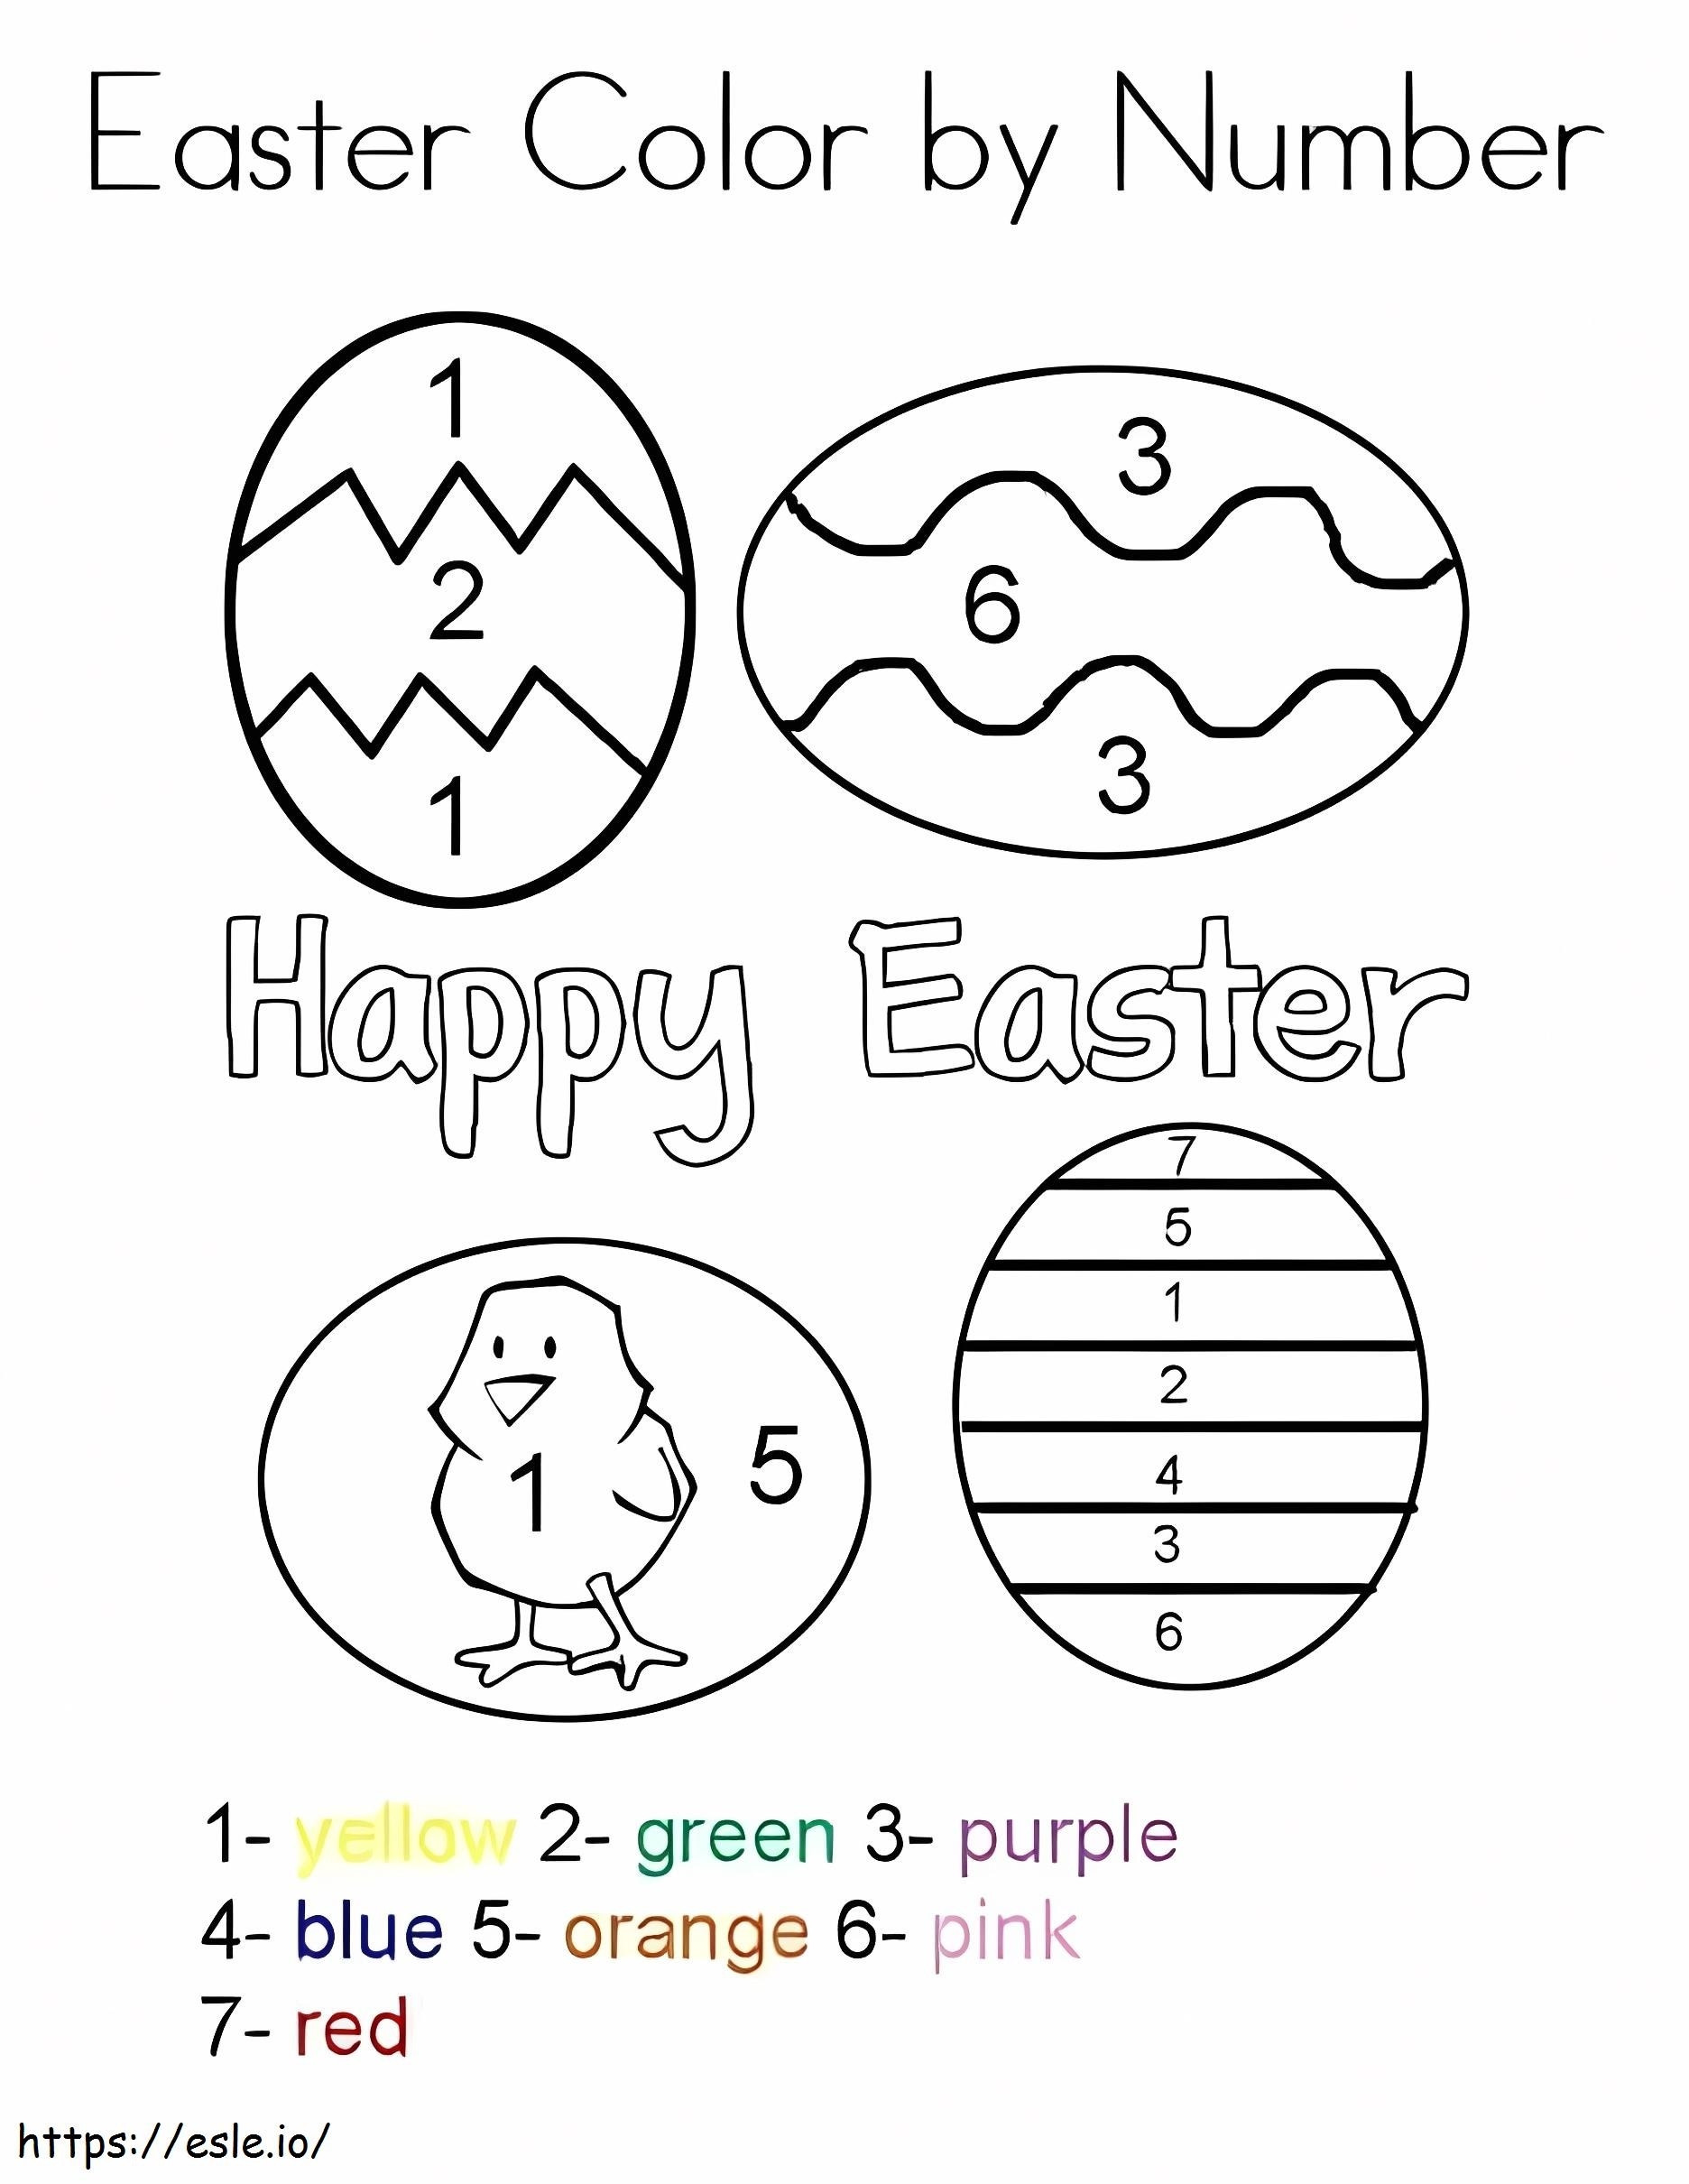 Happy Easter Color By Number coloring page